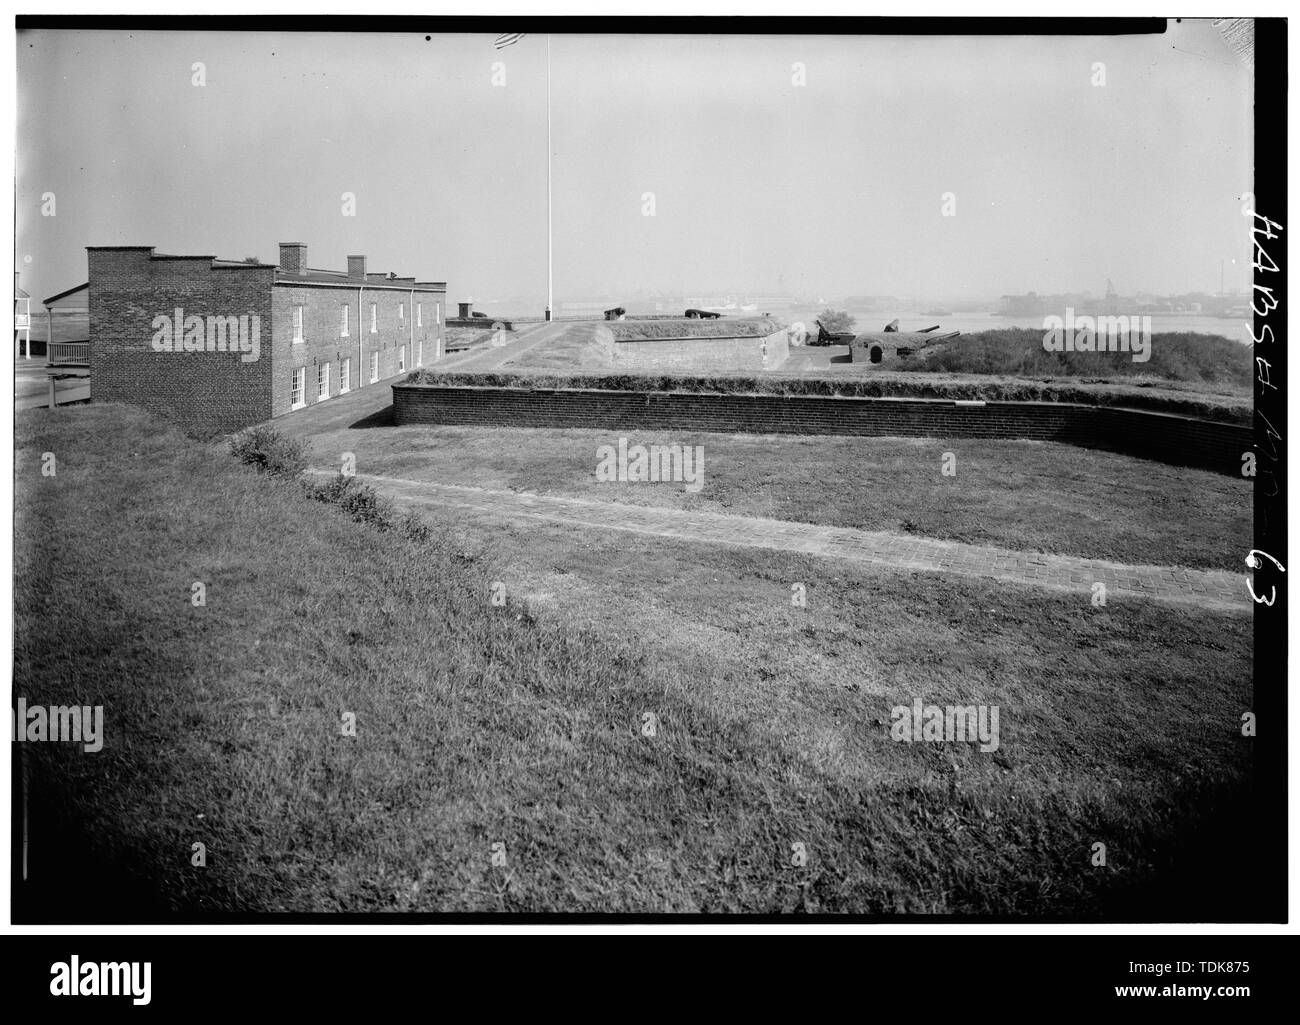 October 1958 VIEW OF SOUTH BASTION (FOREGROUND) LOOKING TOWARD NO. 2 SOLDIERS' BARRACKS (BUILDING E) - Fort McHenry National Monument and Historic Shrine, East Fort Avenue at Whetstone Point, Baltimore, Independent City, MD; Fort Whetstone; Key, Francis Scott; Armistead, George; Pickersgill, Mary; Foncin, Jean; U.S. Navy, photographer; Peterson, Charles E., photographer; Boucher, Jack E., photographer; Nelson, Lee H., historian; Carroll, Orville W., delineator; Nelson, Harold A., delineator; Nelson, Trevor, delineator; Barr, Benjamin F., delineator; Wrenn, George L., delineator Stock Photo